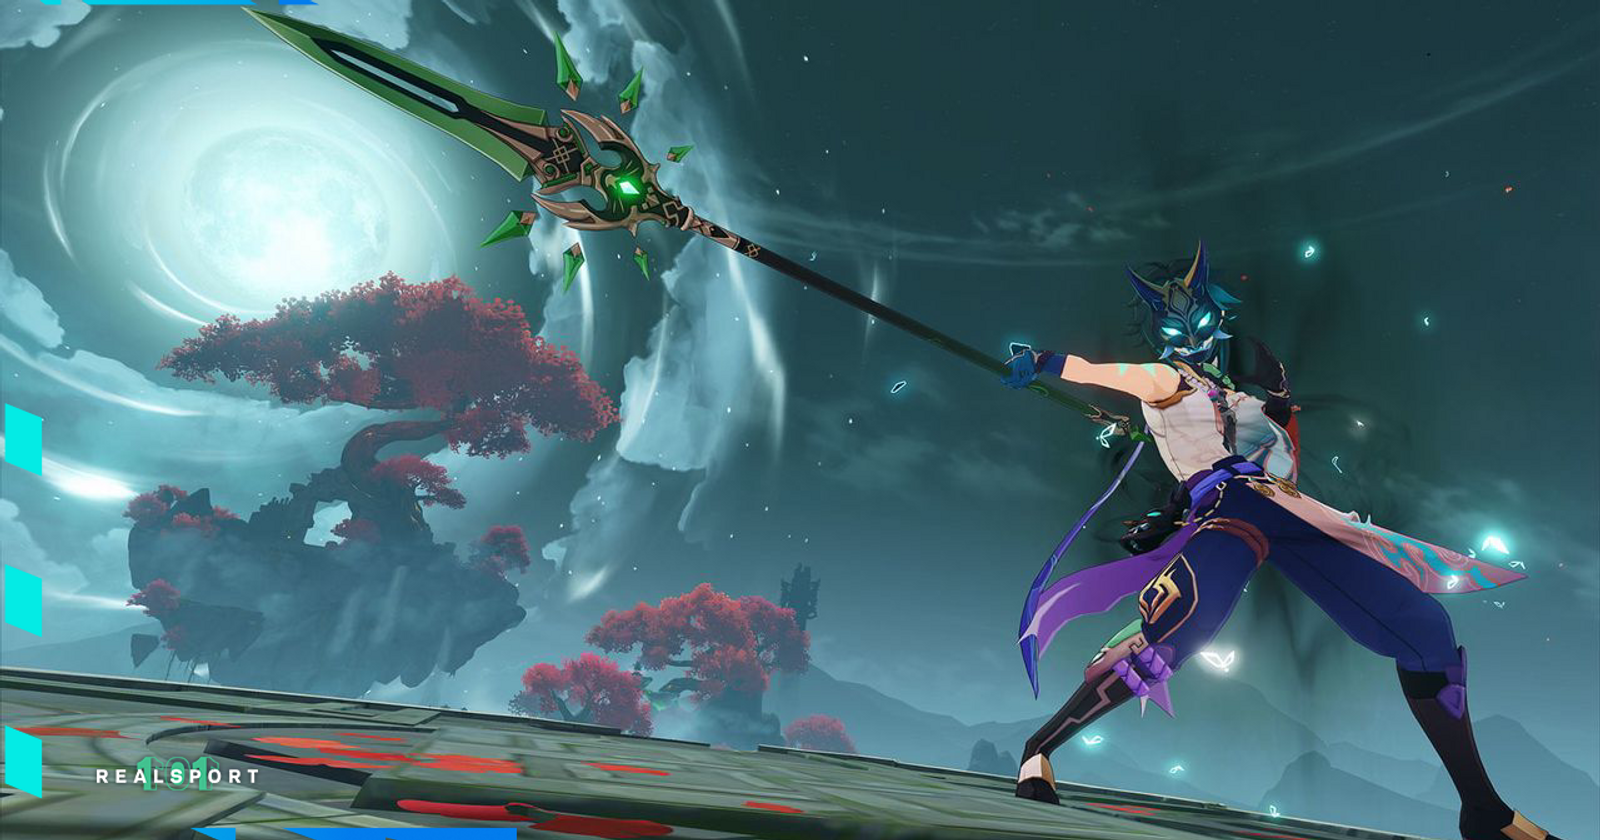 Genshin Impact Xiao release date and redeem codes revealed